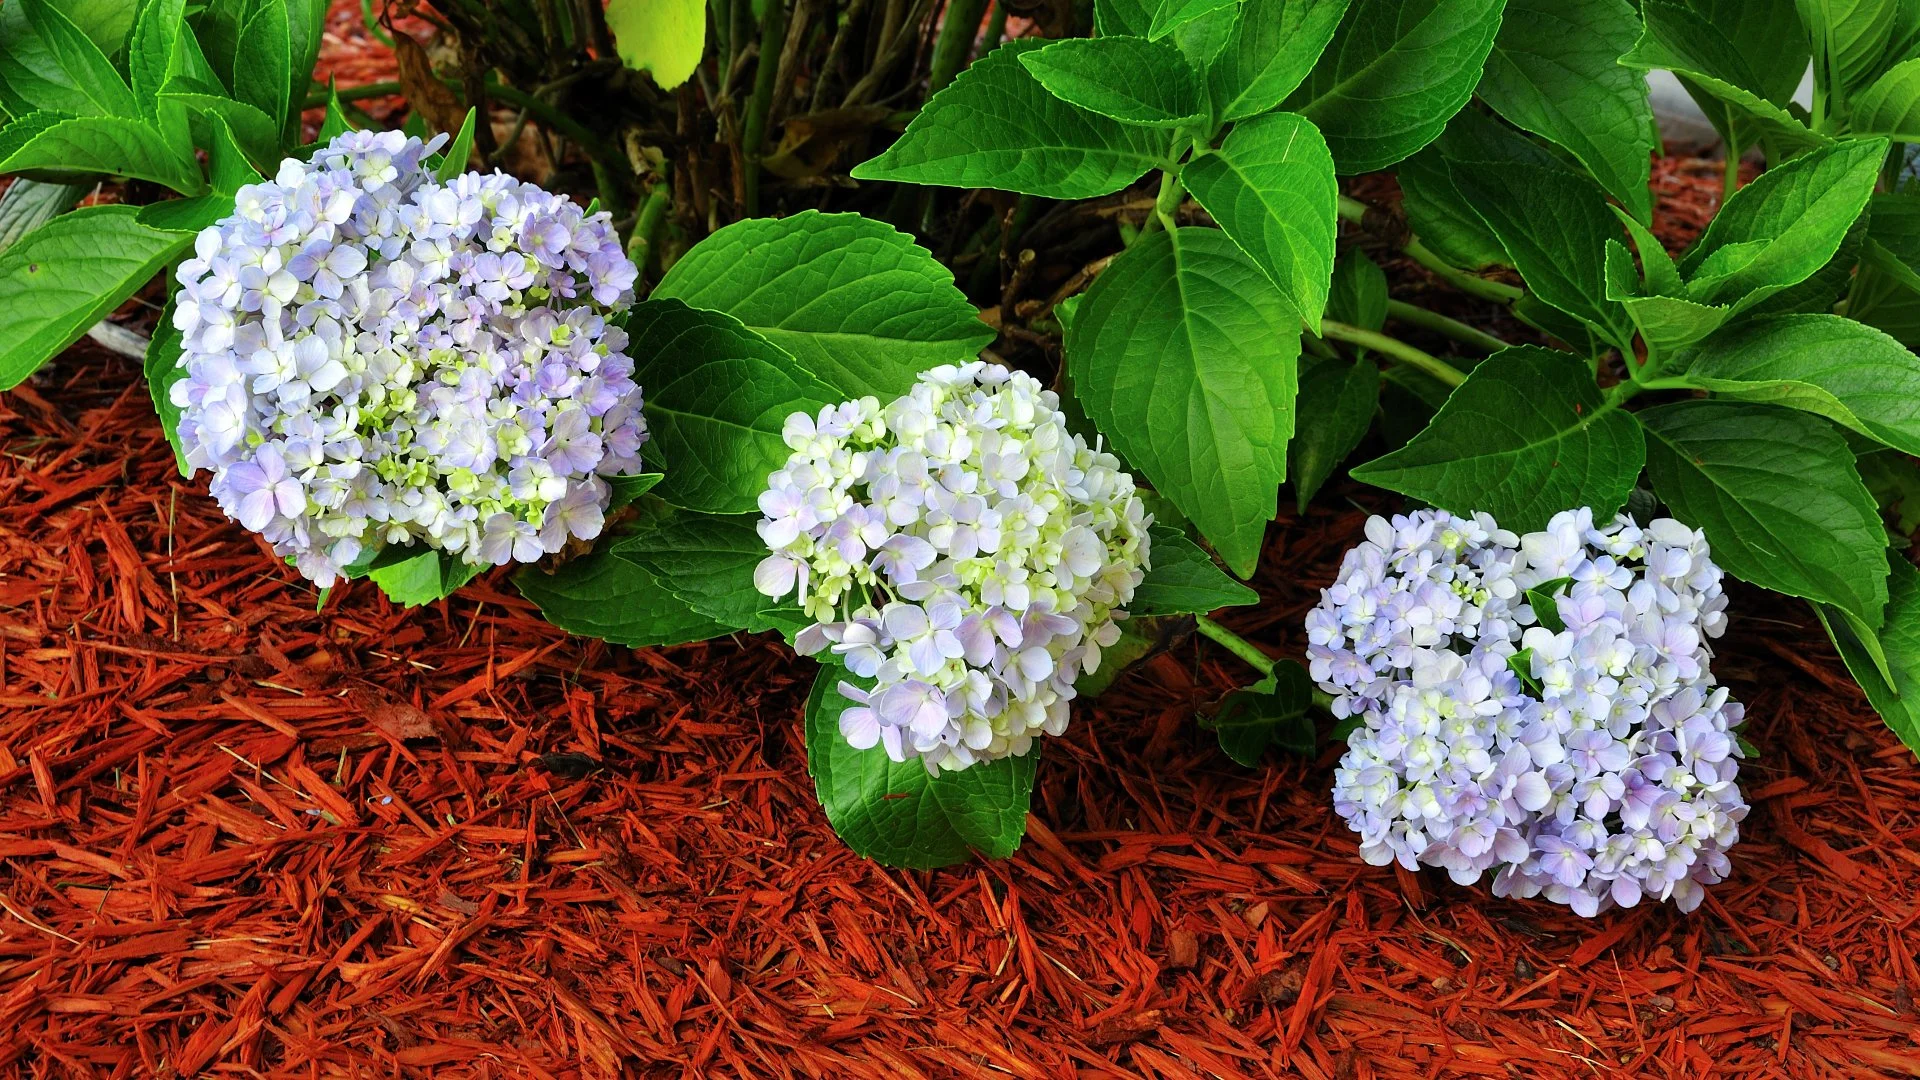 Give Your Plants the Protection They Need by Refreshing Your Mulch Every Spring